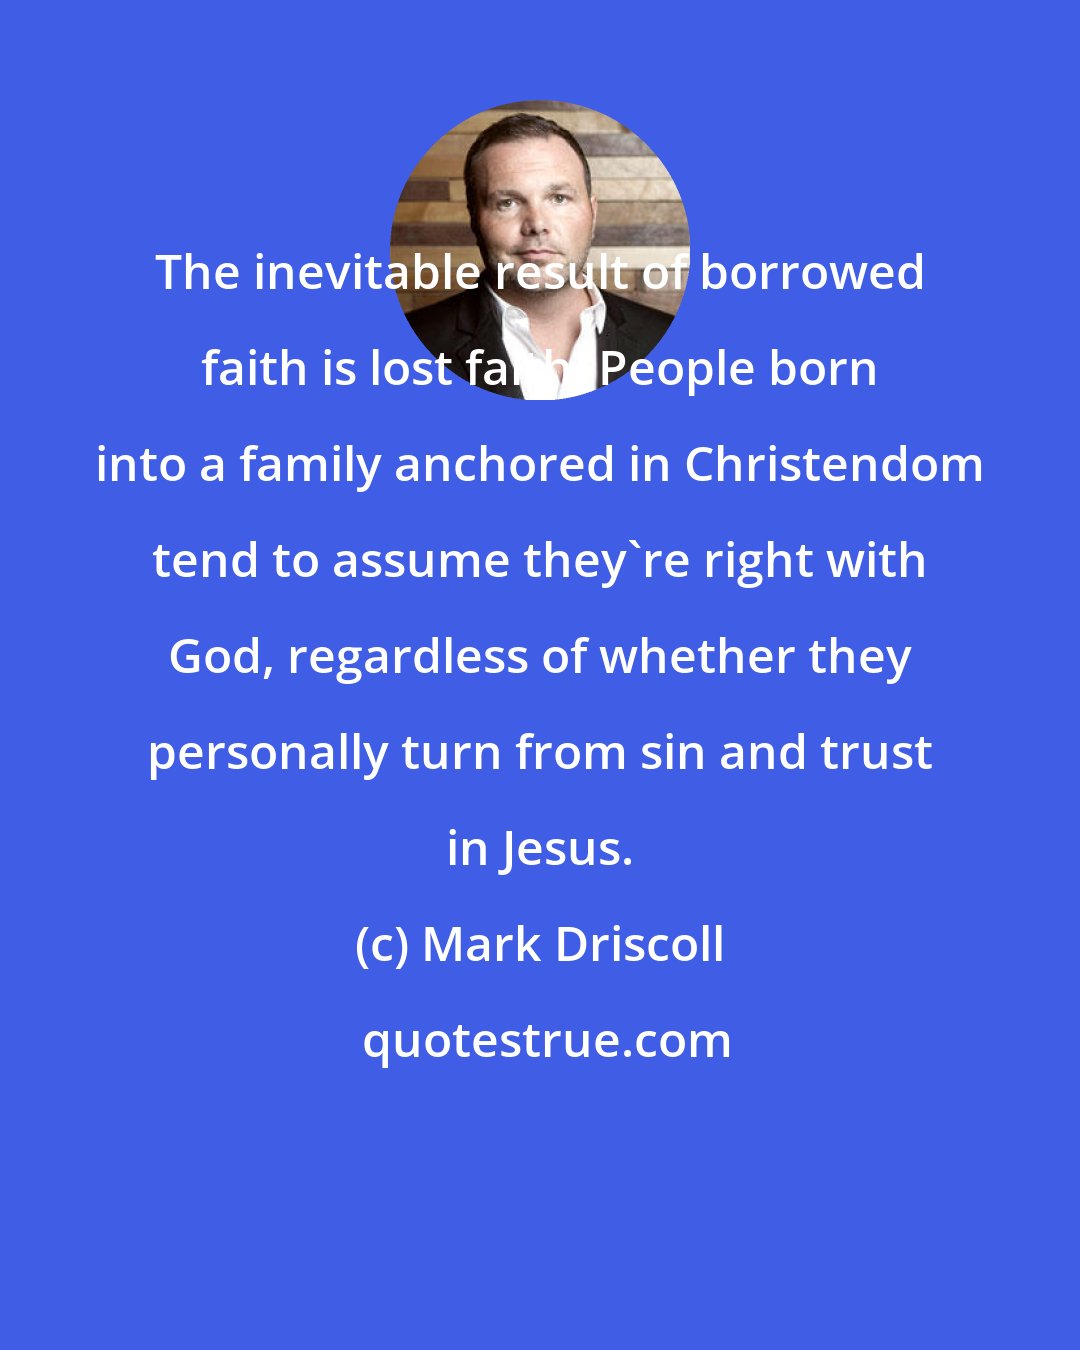 Mark Driscoll: The inevitable result of borrowed faith is lost faith. People born into a family anchored in Christendom tend to assume they're right with God, regardless of whether they personally turn from sin and trust in Jesus.